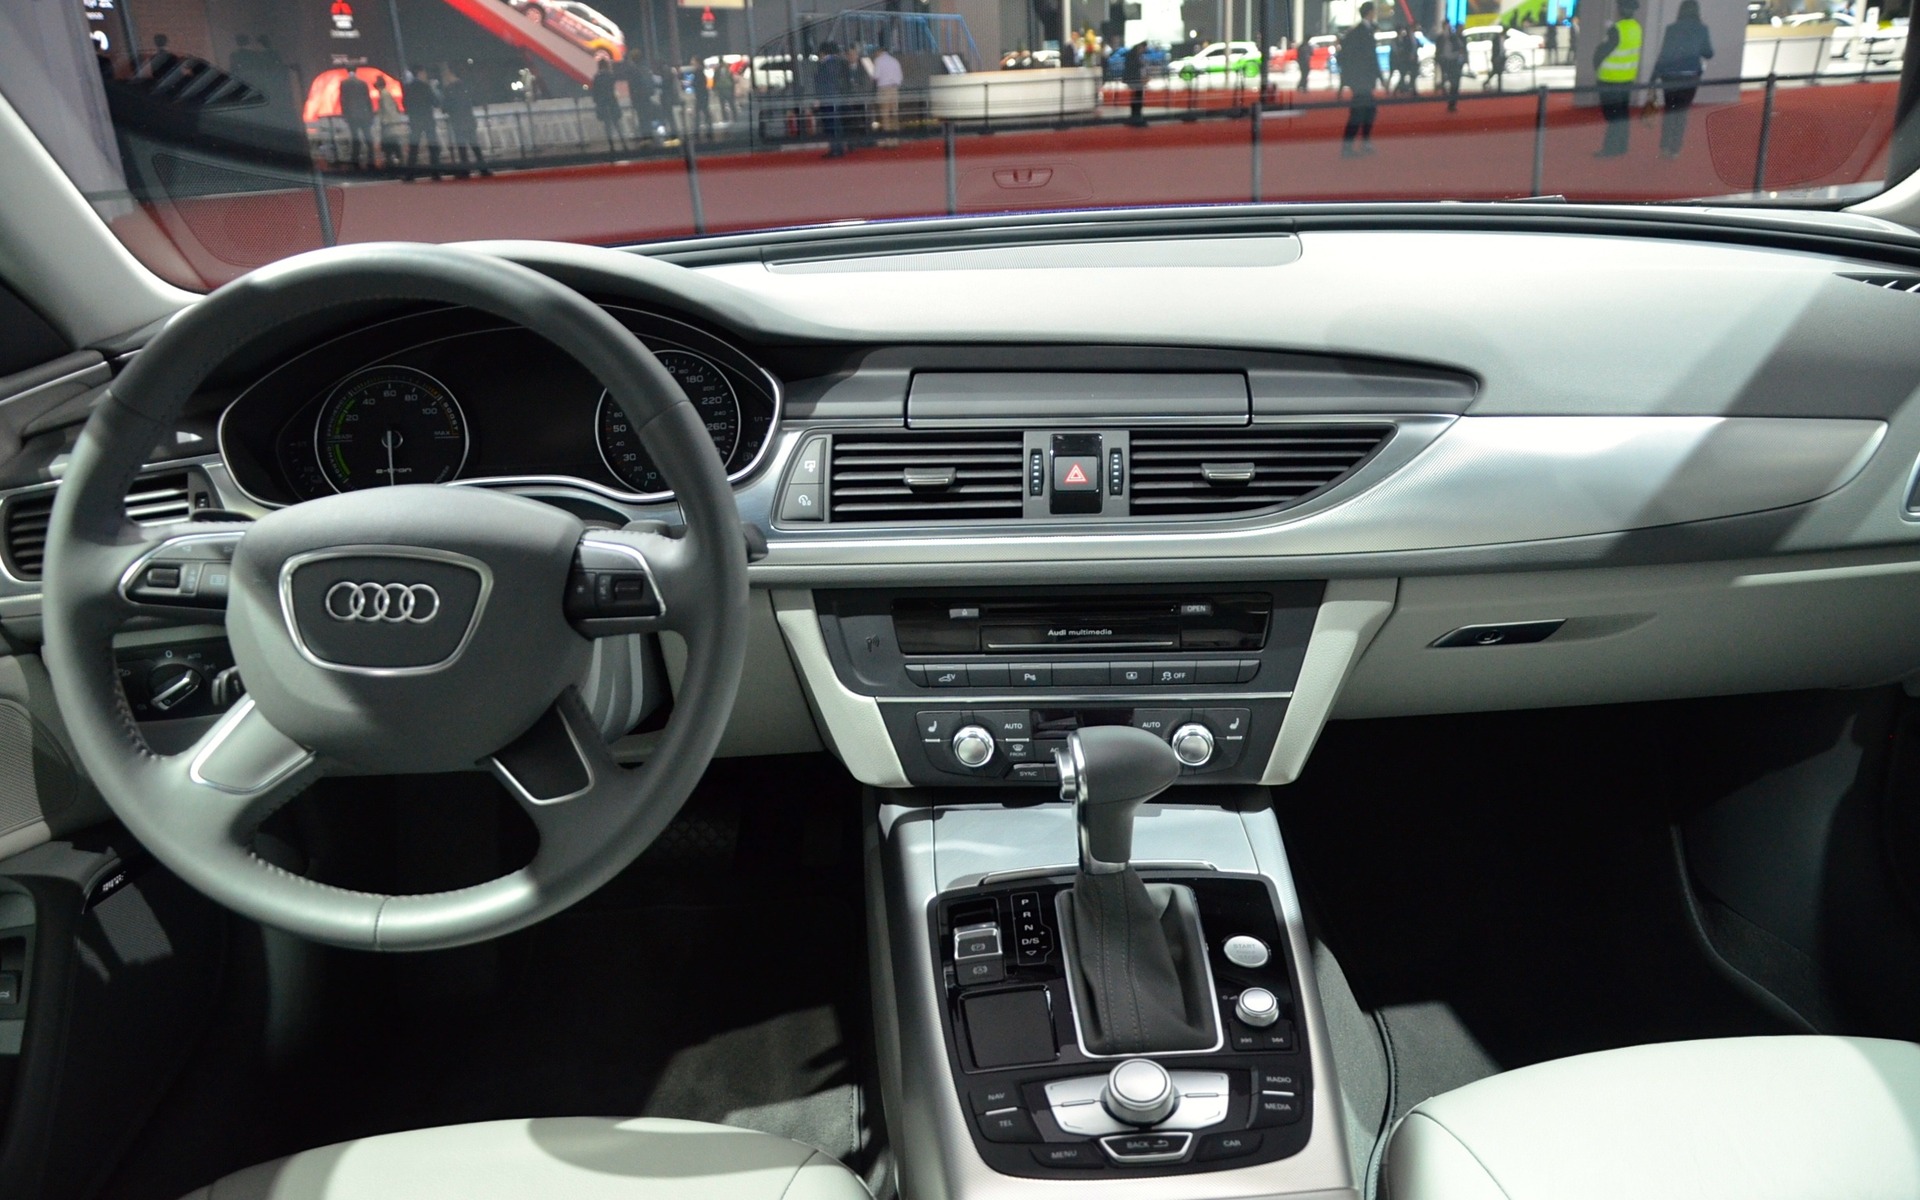 Inside, it’s exactly like the other A6 models.